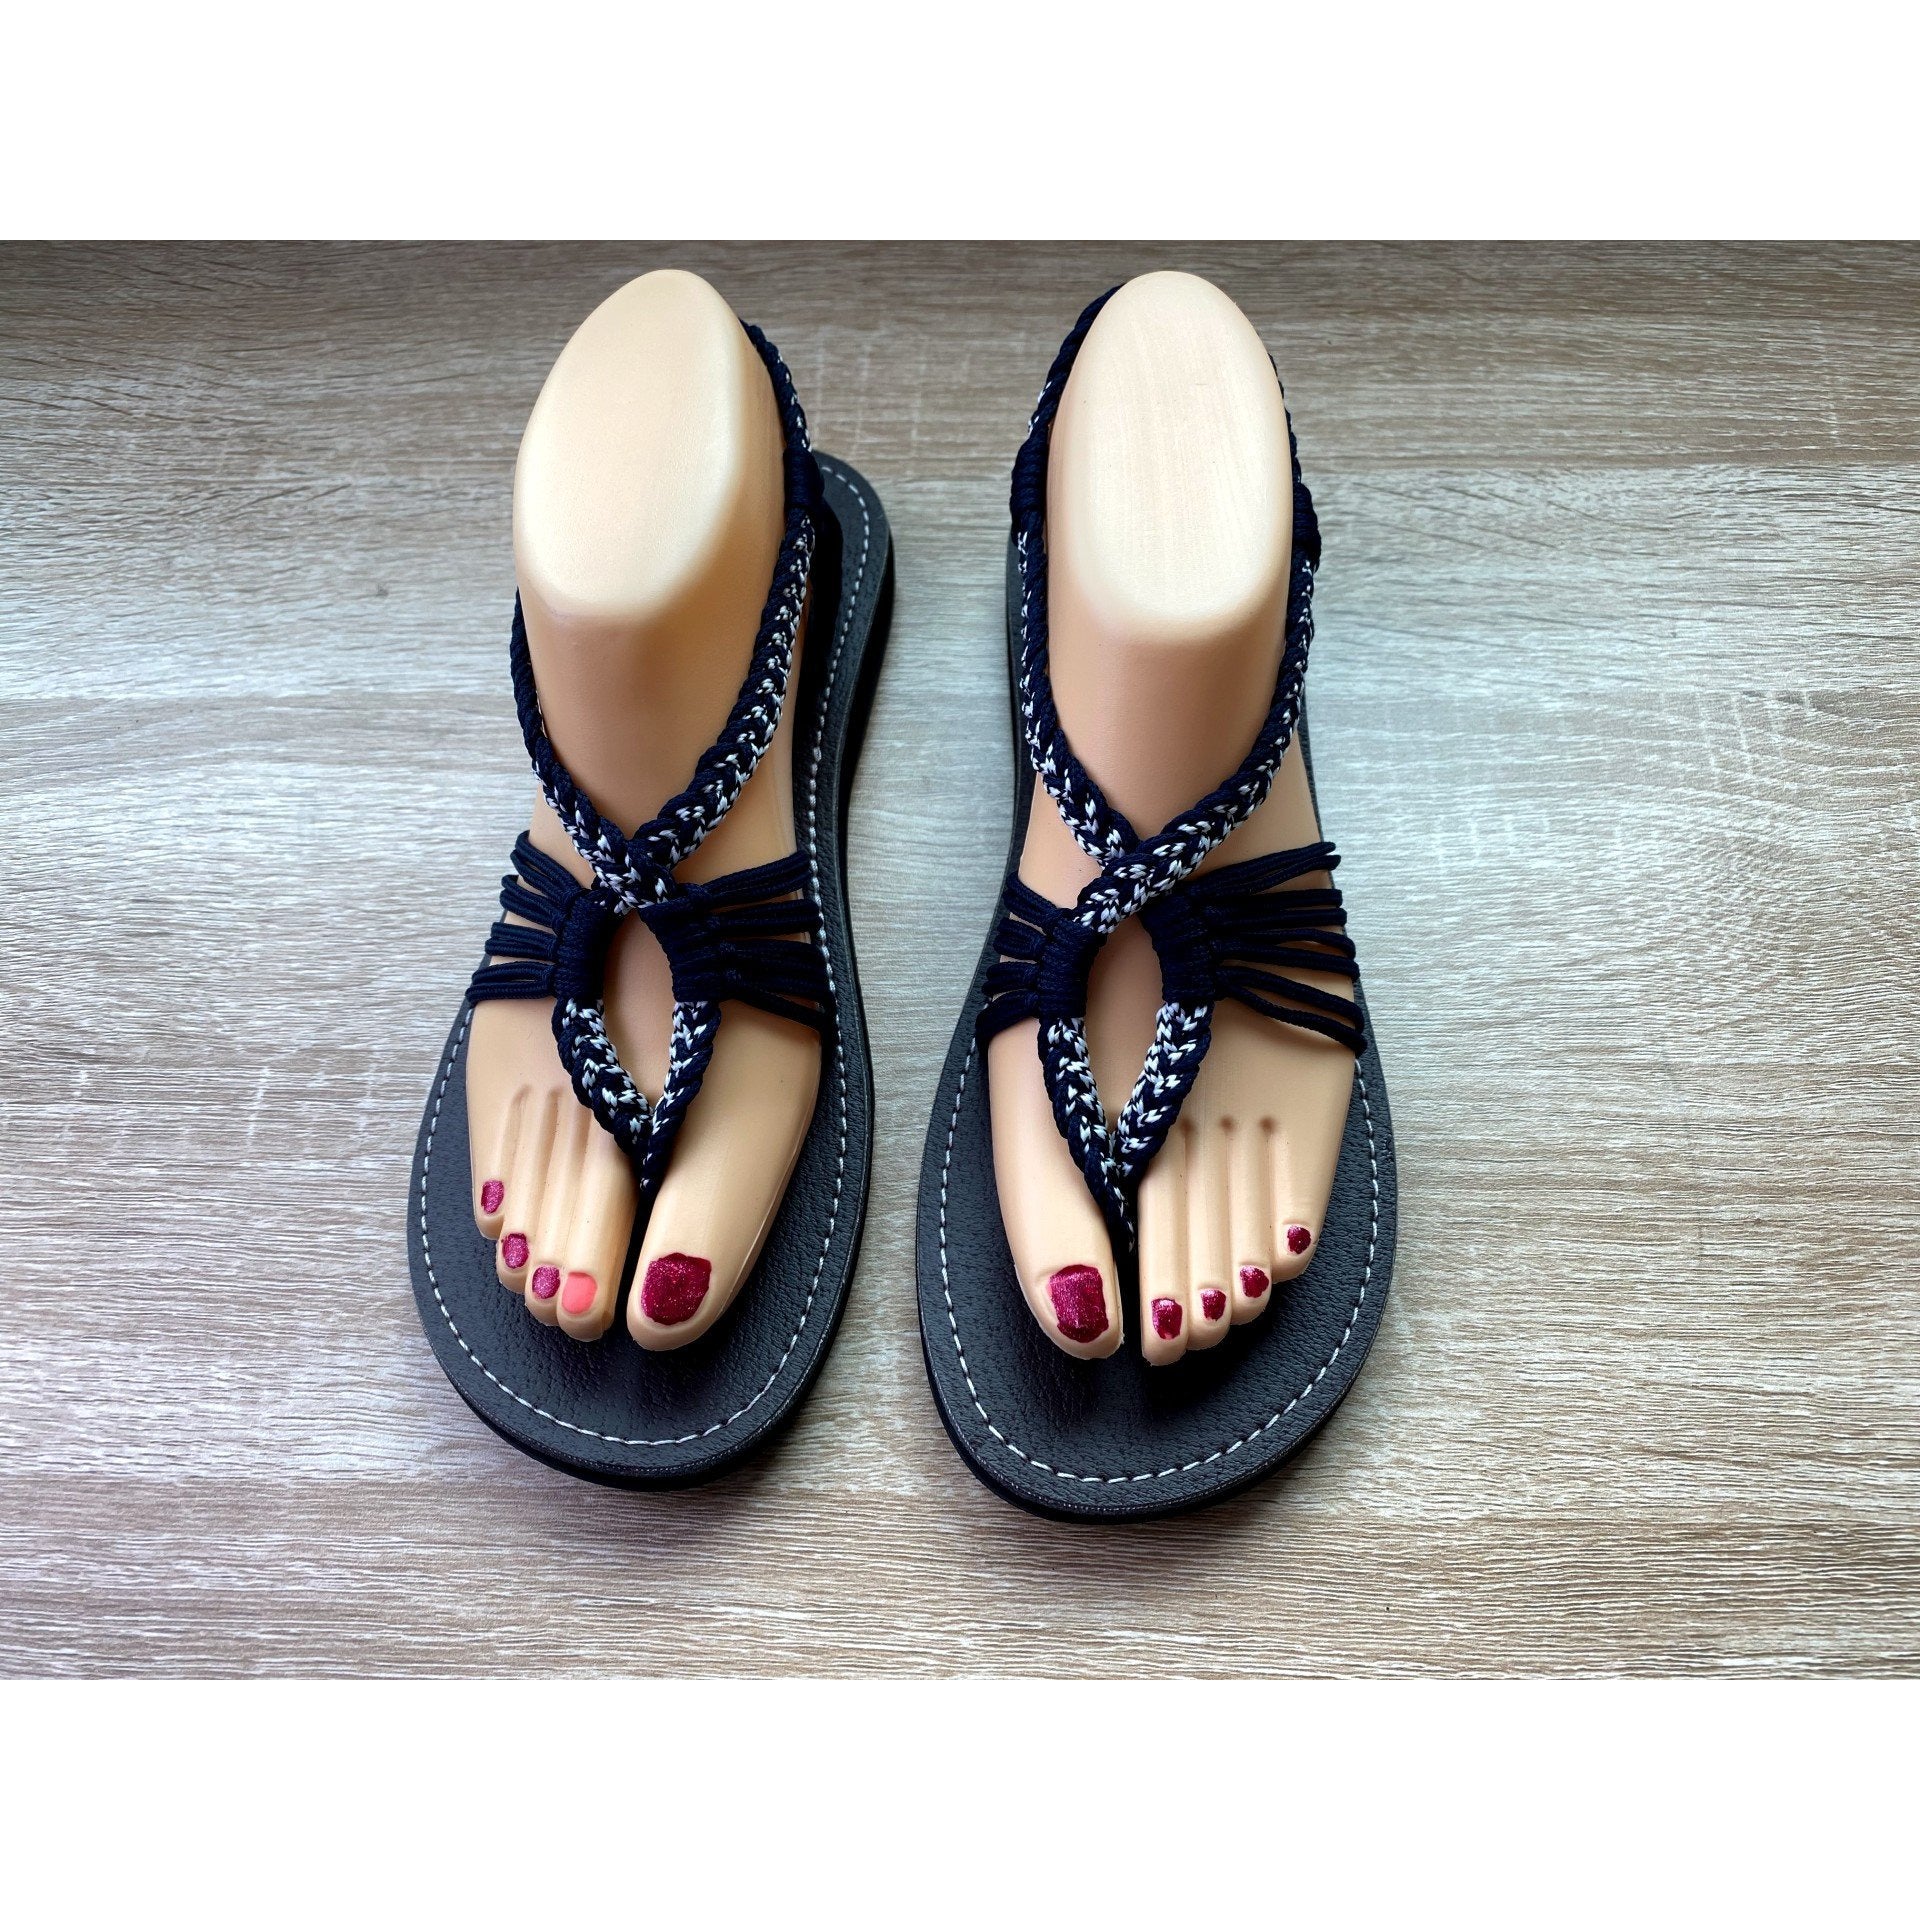 Shoes - Braided Sandals Navy Blue/White